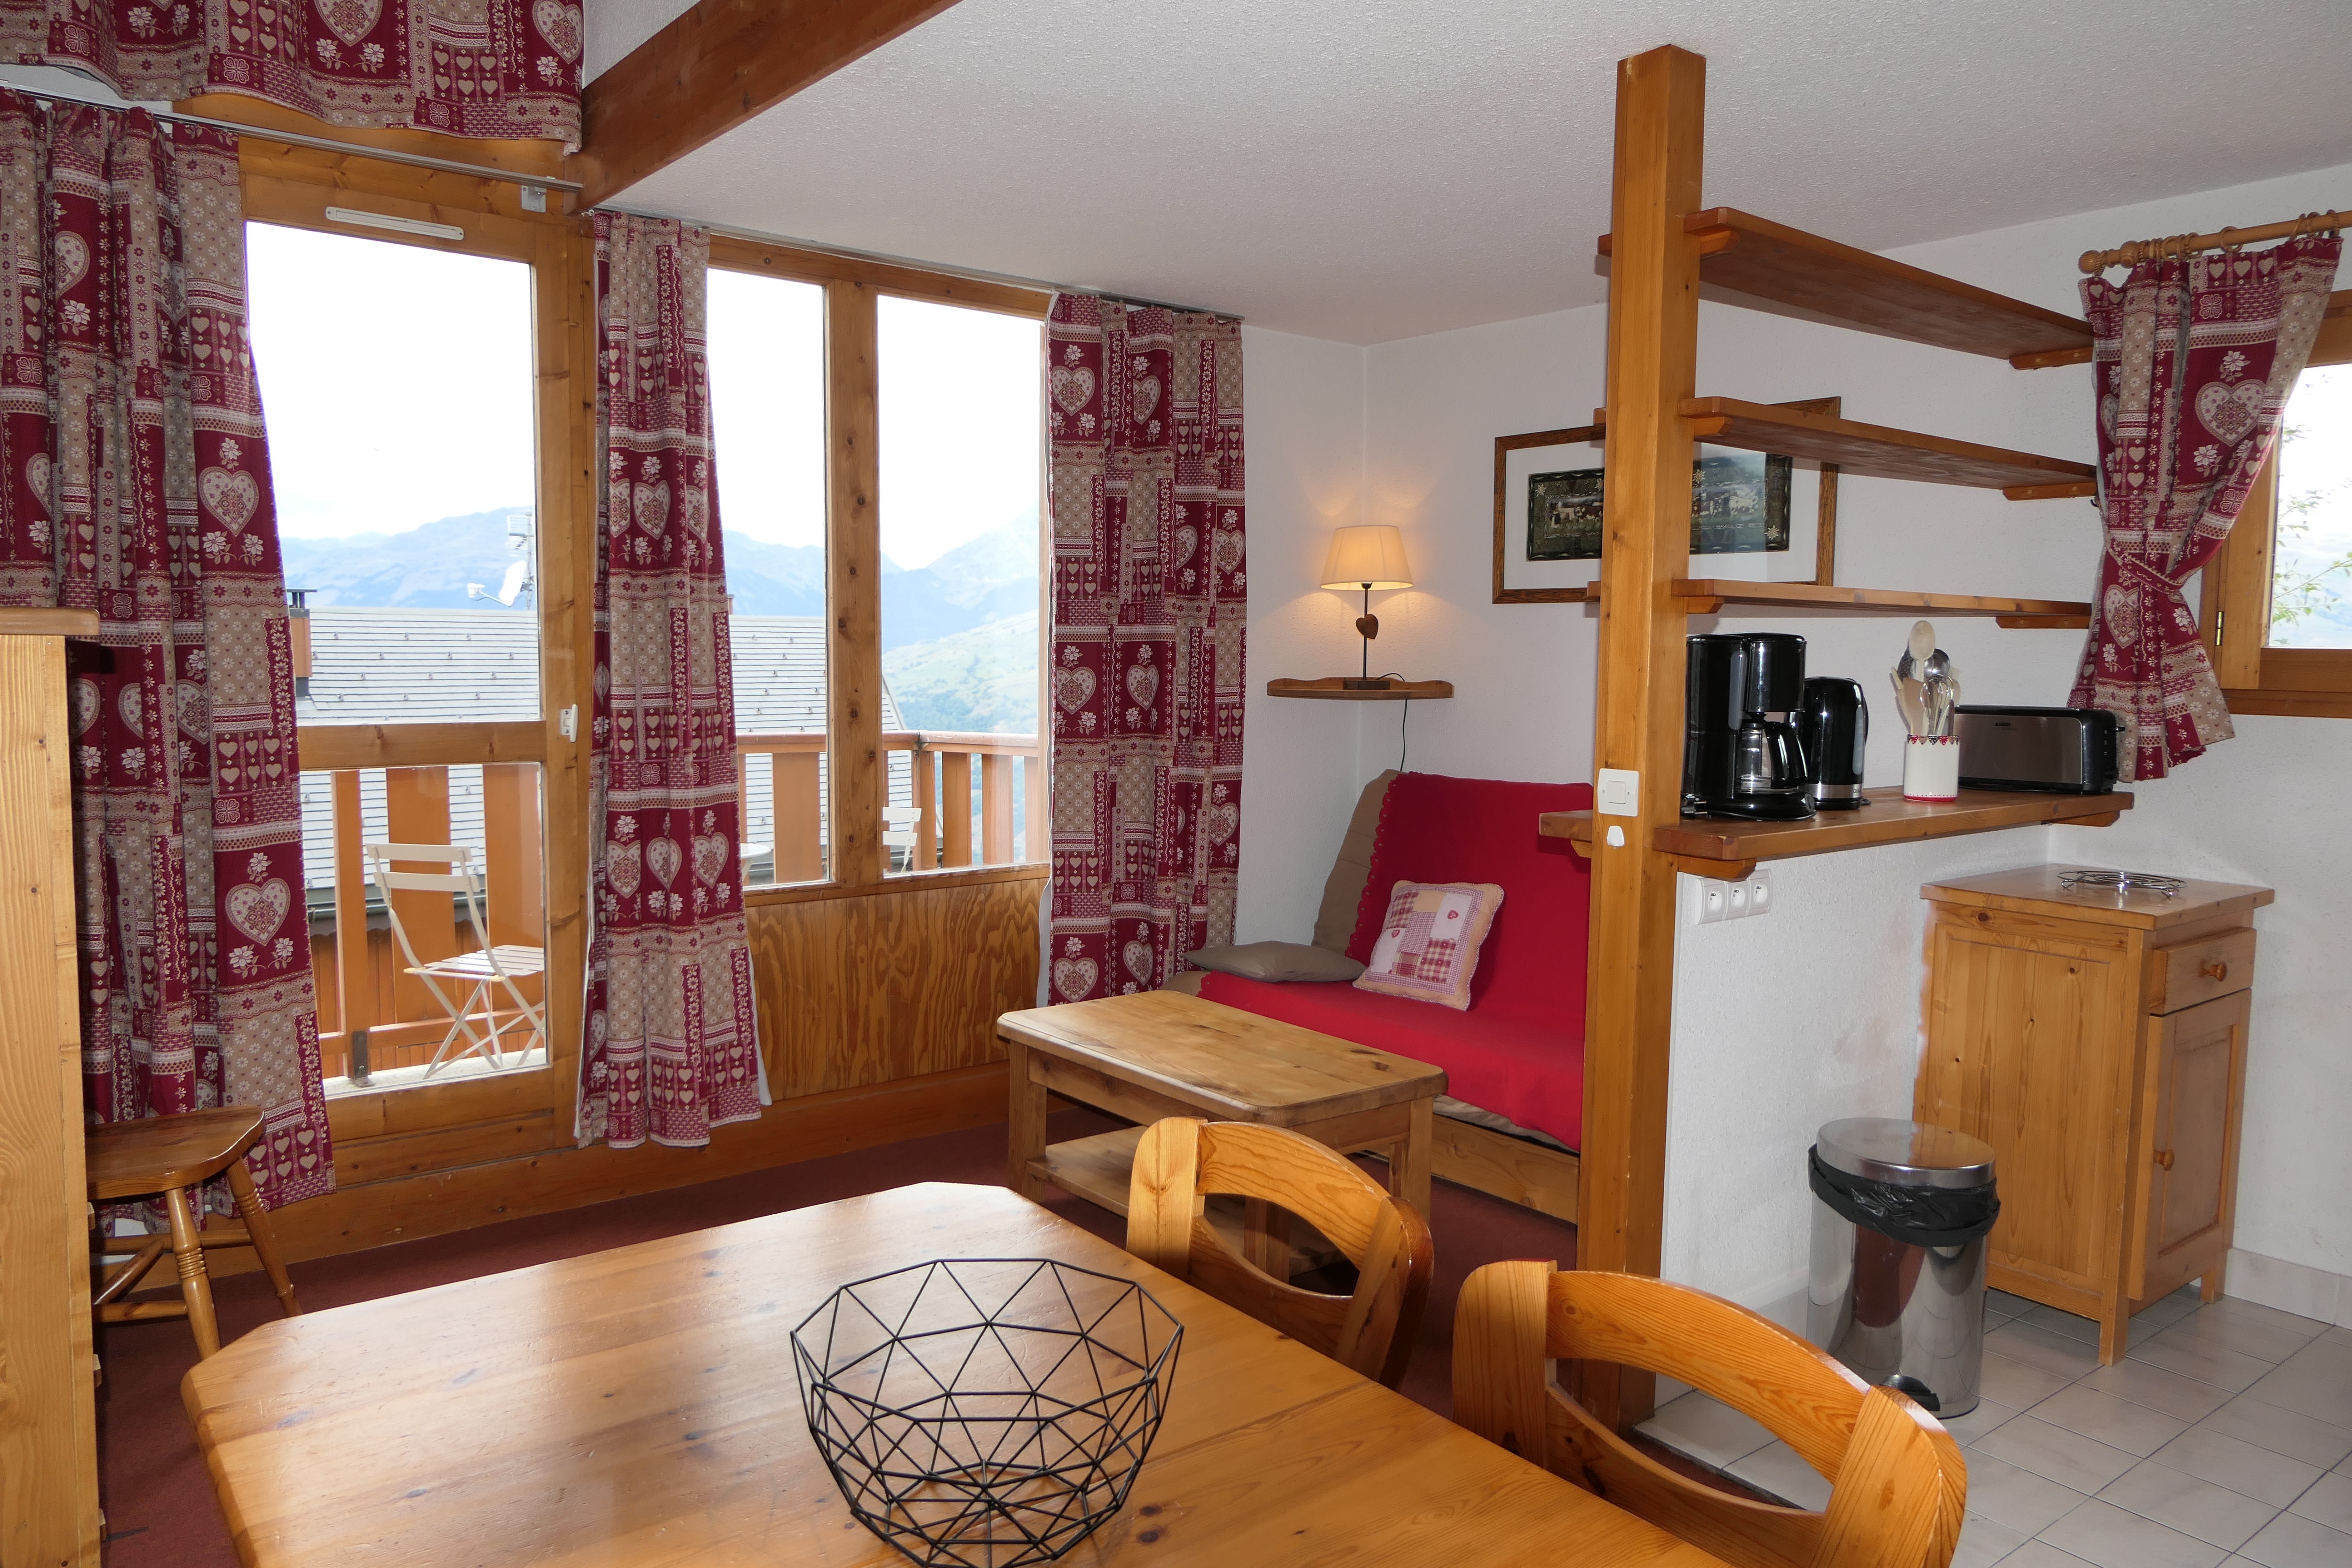 Petite Ourse N°101 - 6 Couchages - Appartement Petite Ourse N°101 - 6 Couchages - Vallandry